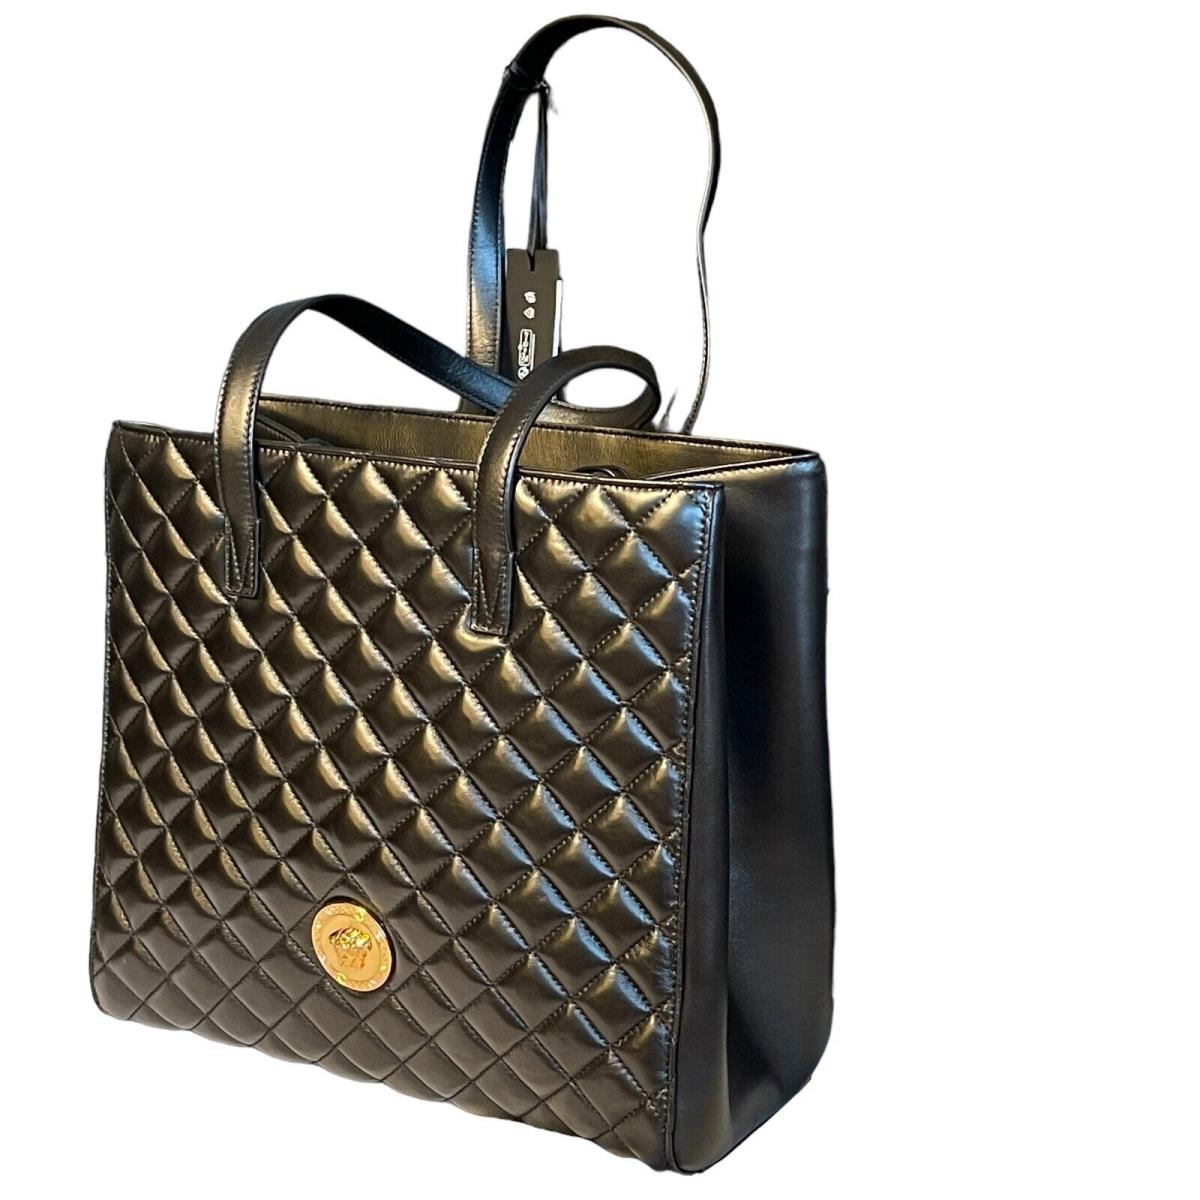 Versace 1013789 Black Quilted Lamb Leather Tote with Gold-toned Medusa Hardware